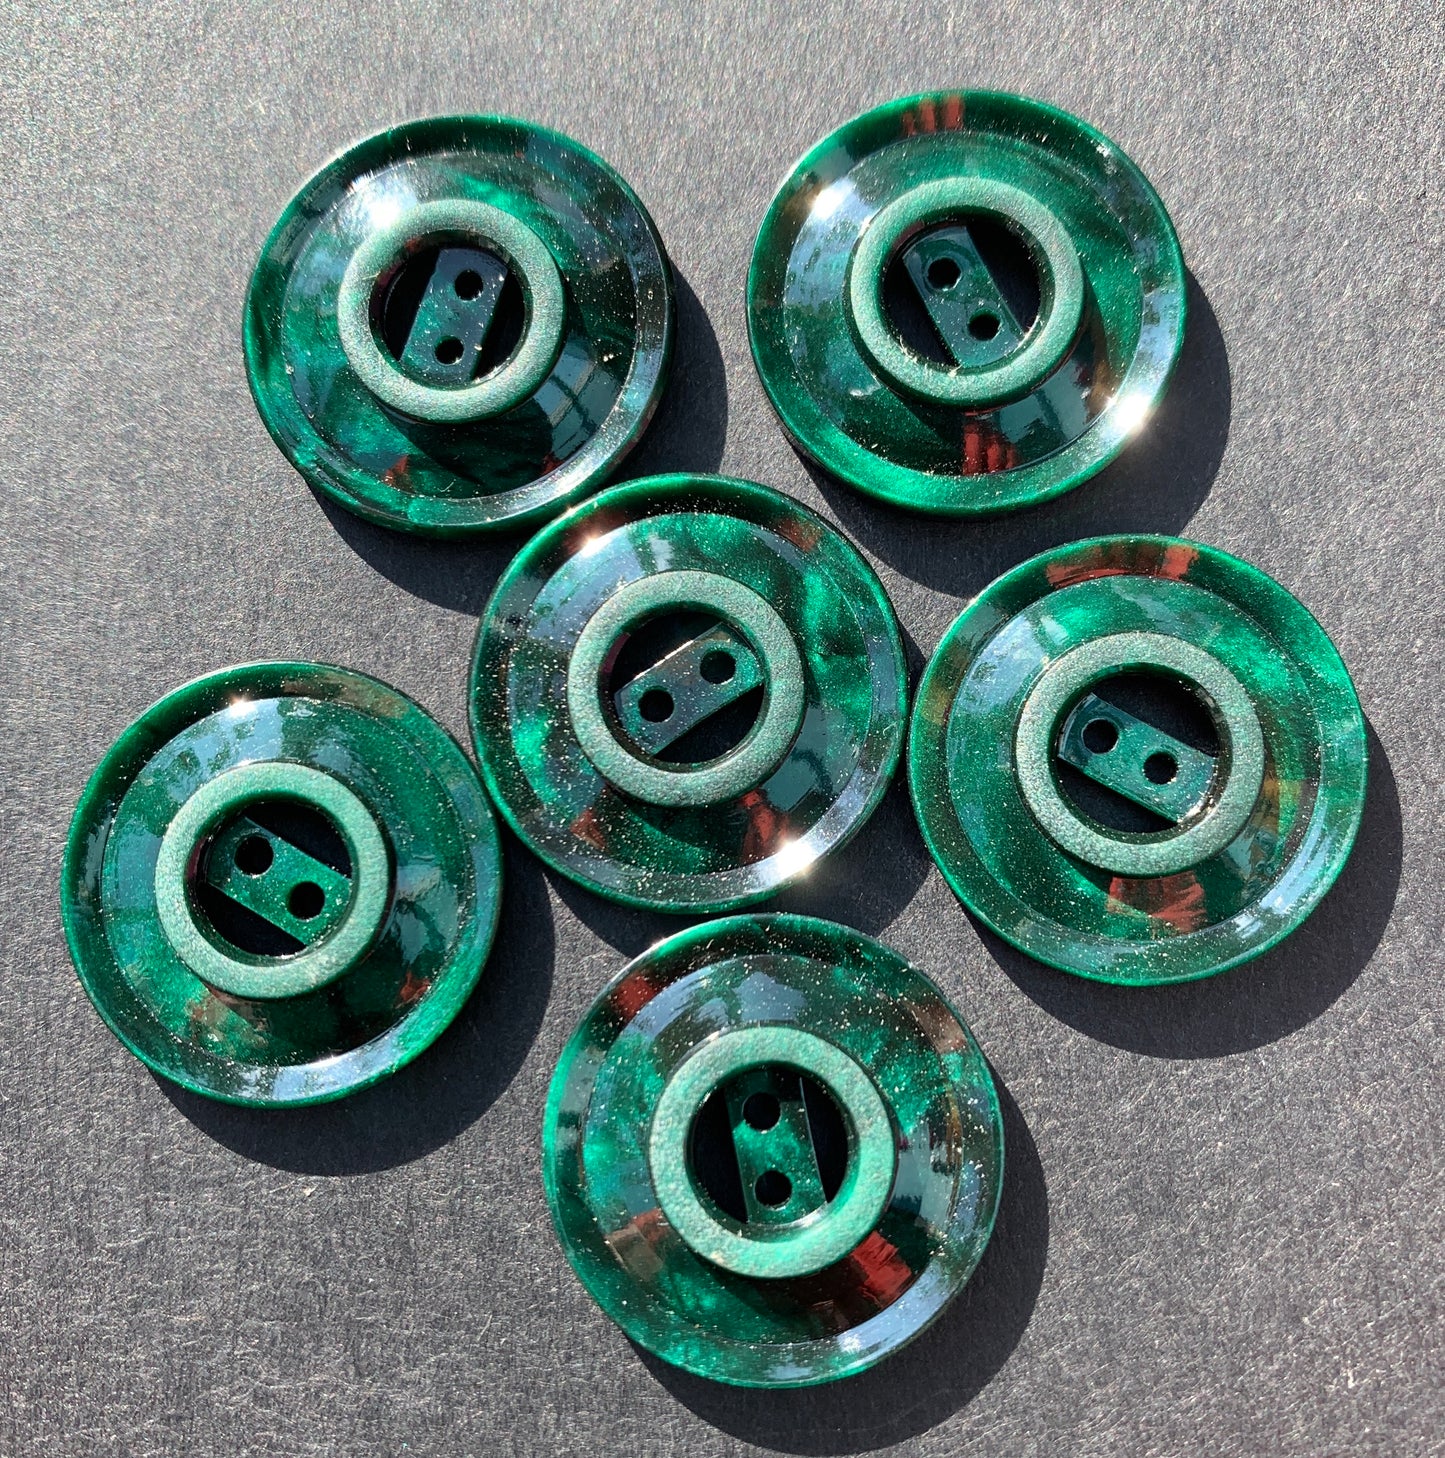 Vintage Shiny Seaweed Dome Shaped  2.2cm  Buttons - 6 or 24